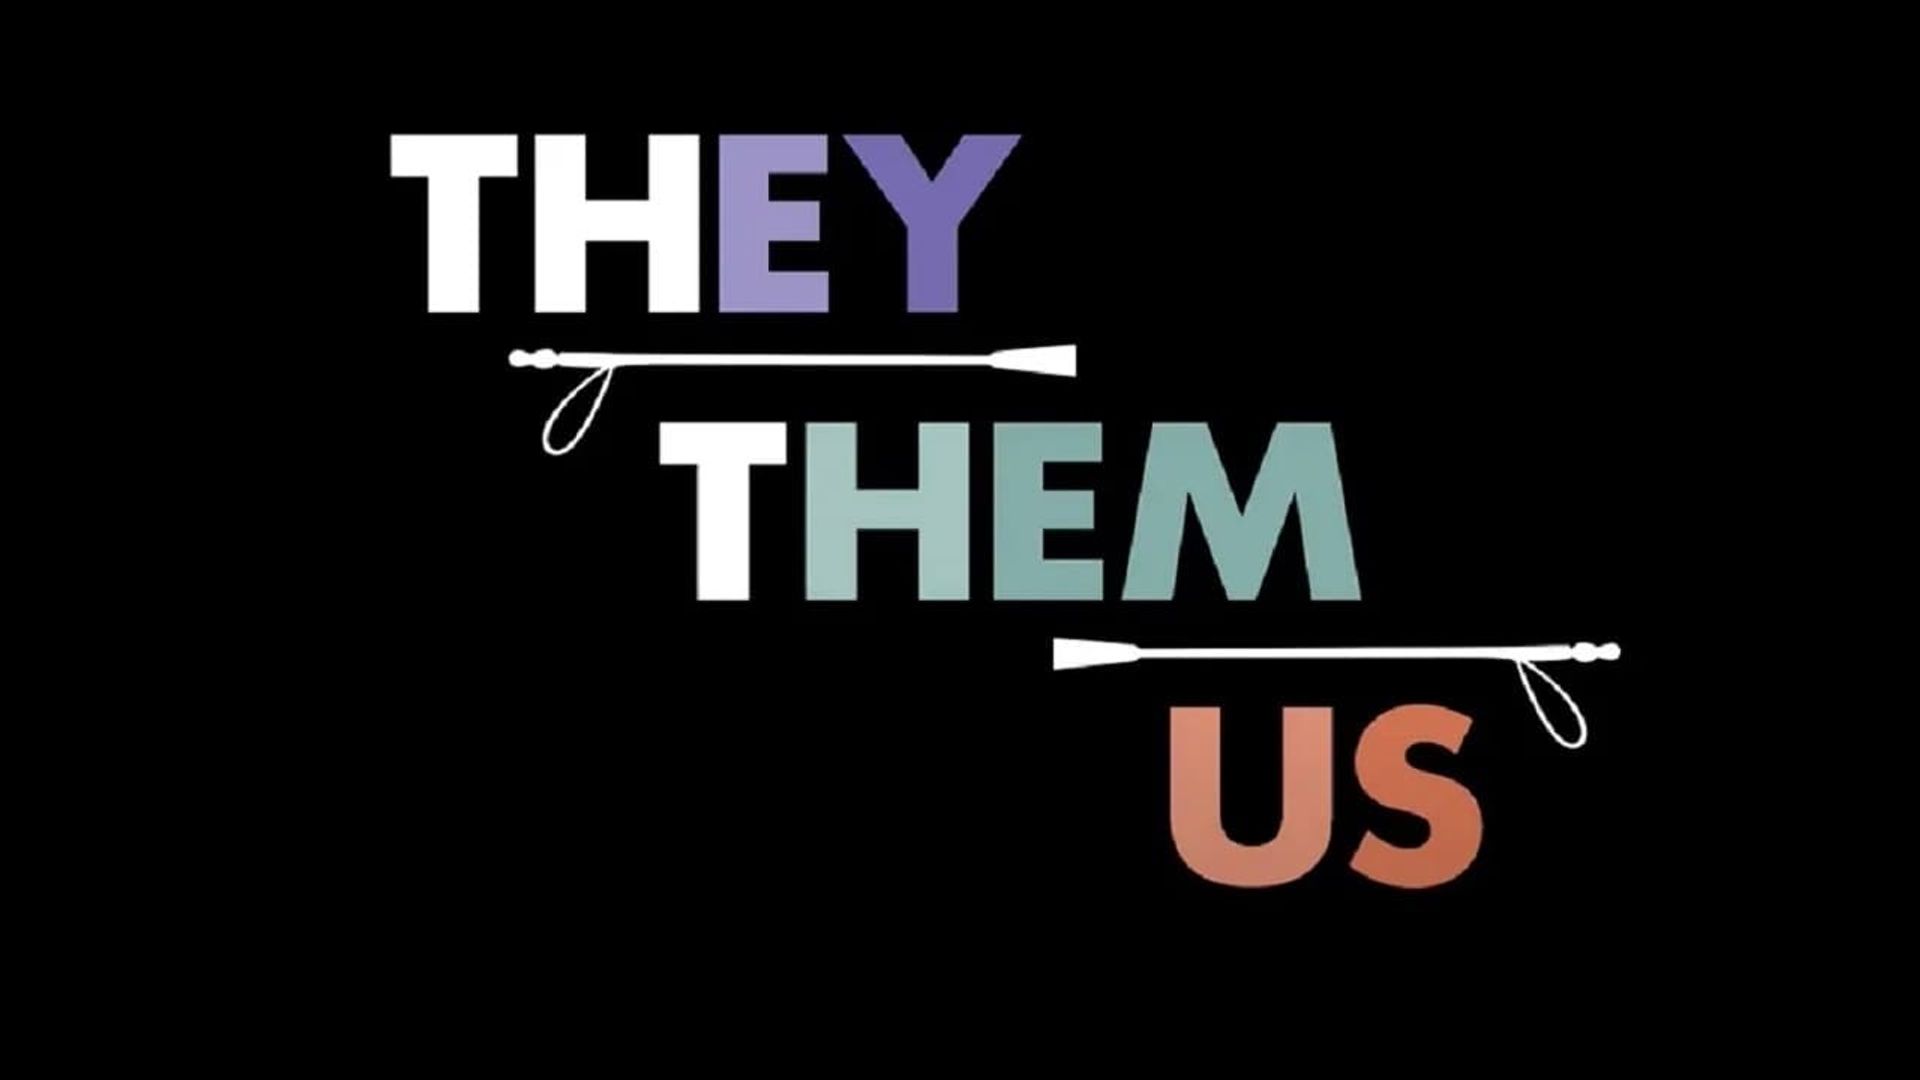 They/Them/Us background